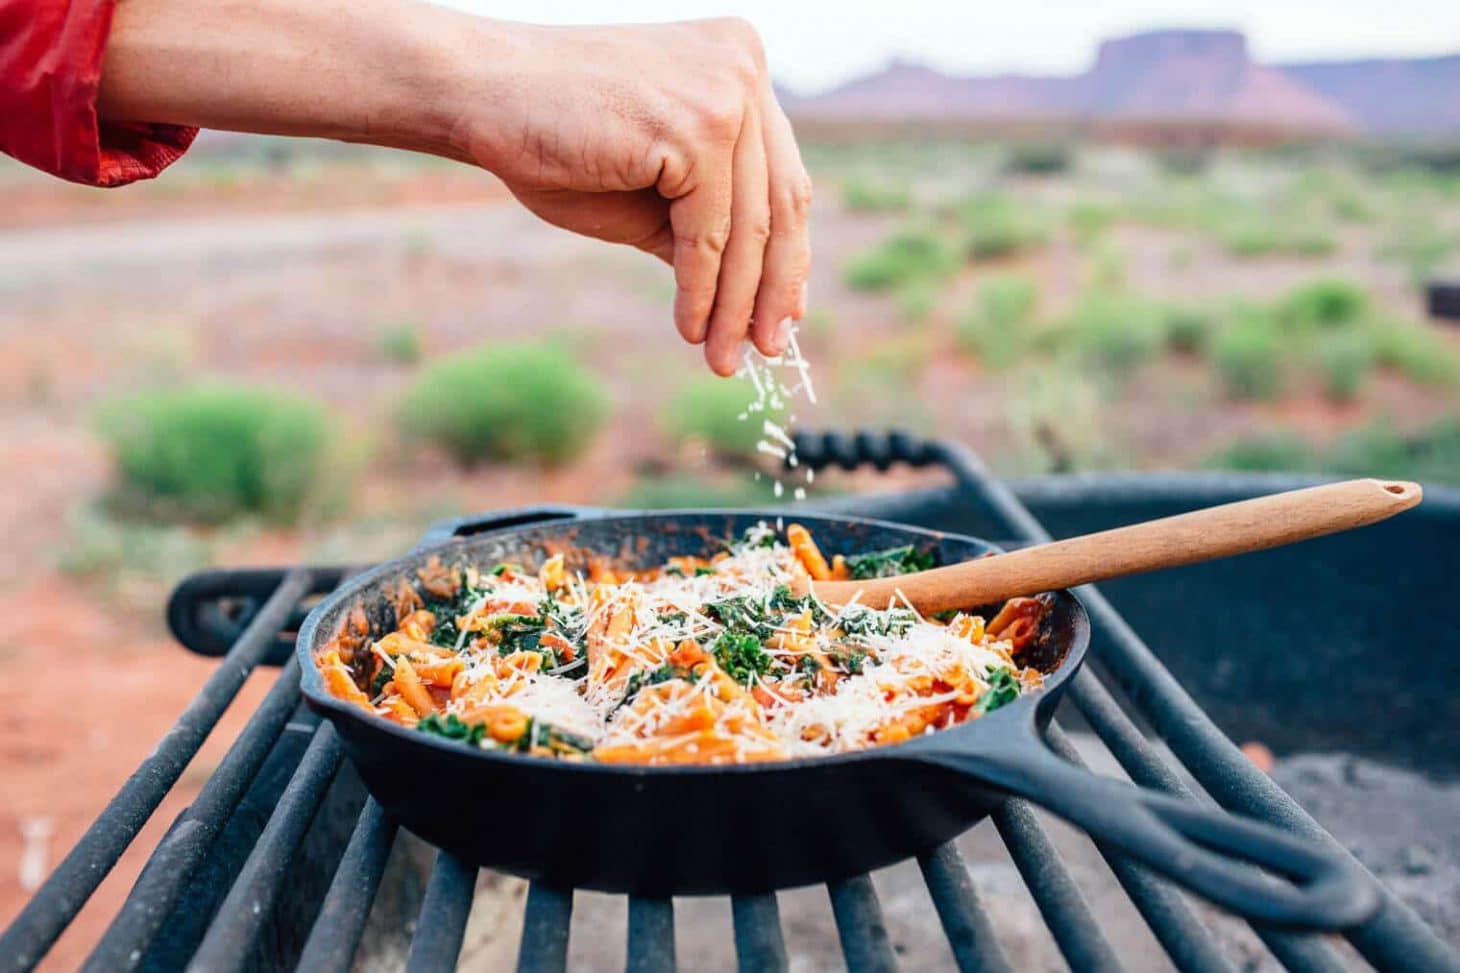 How to Cook While Camping?